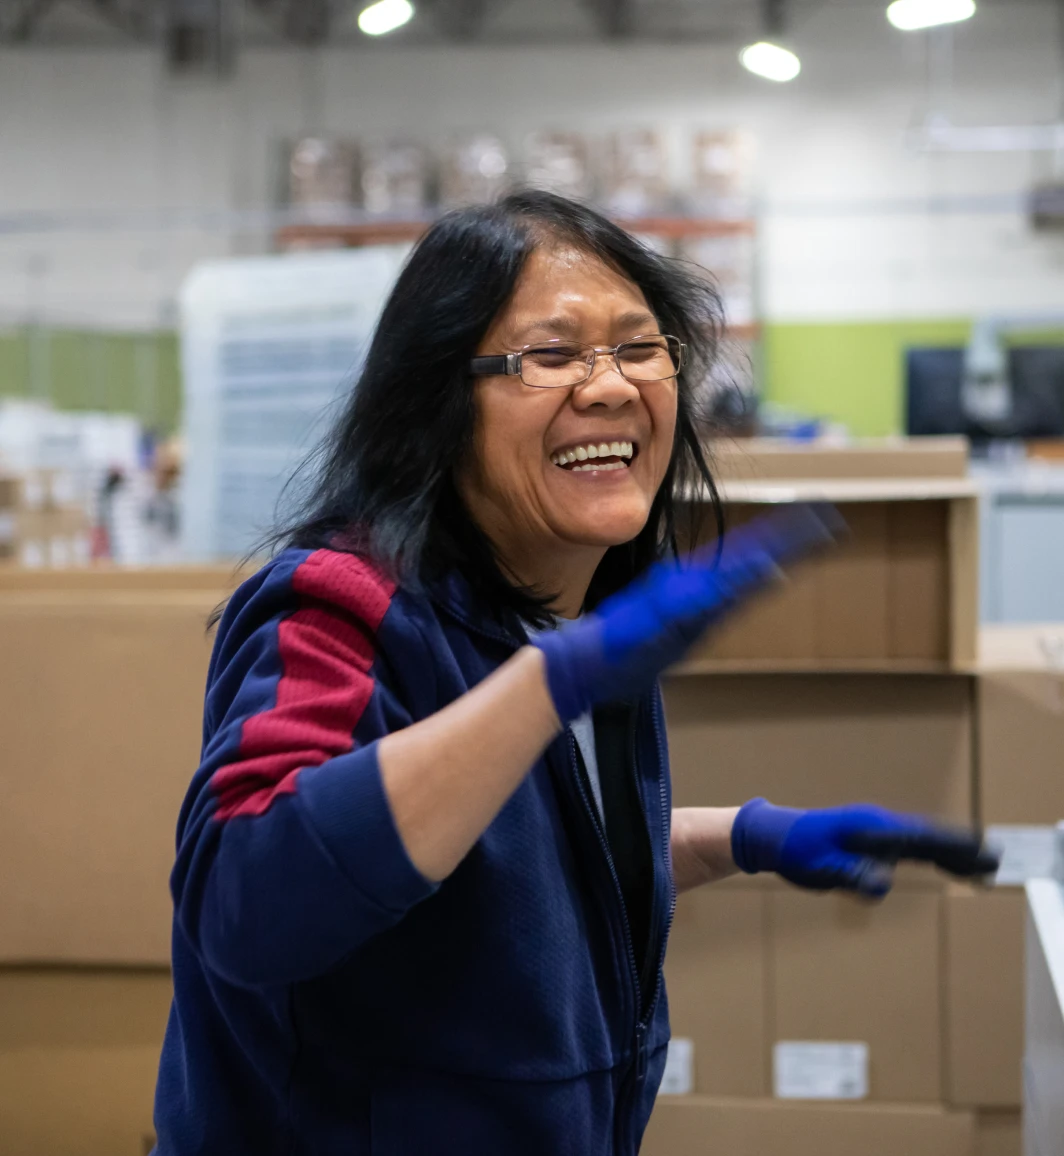 Woman laughing while working among boxes